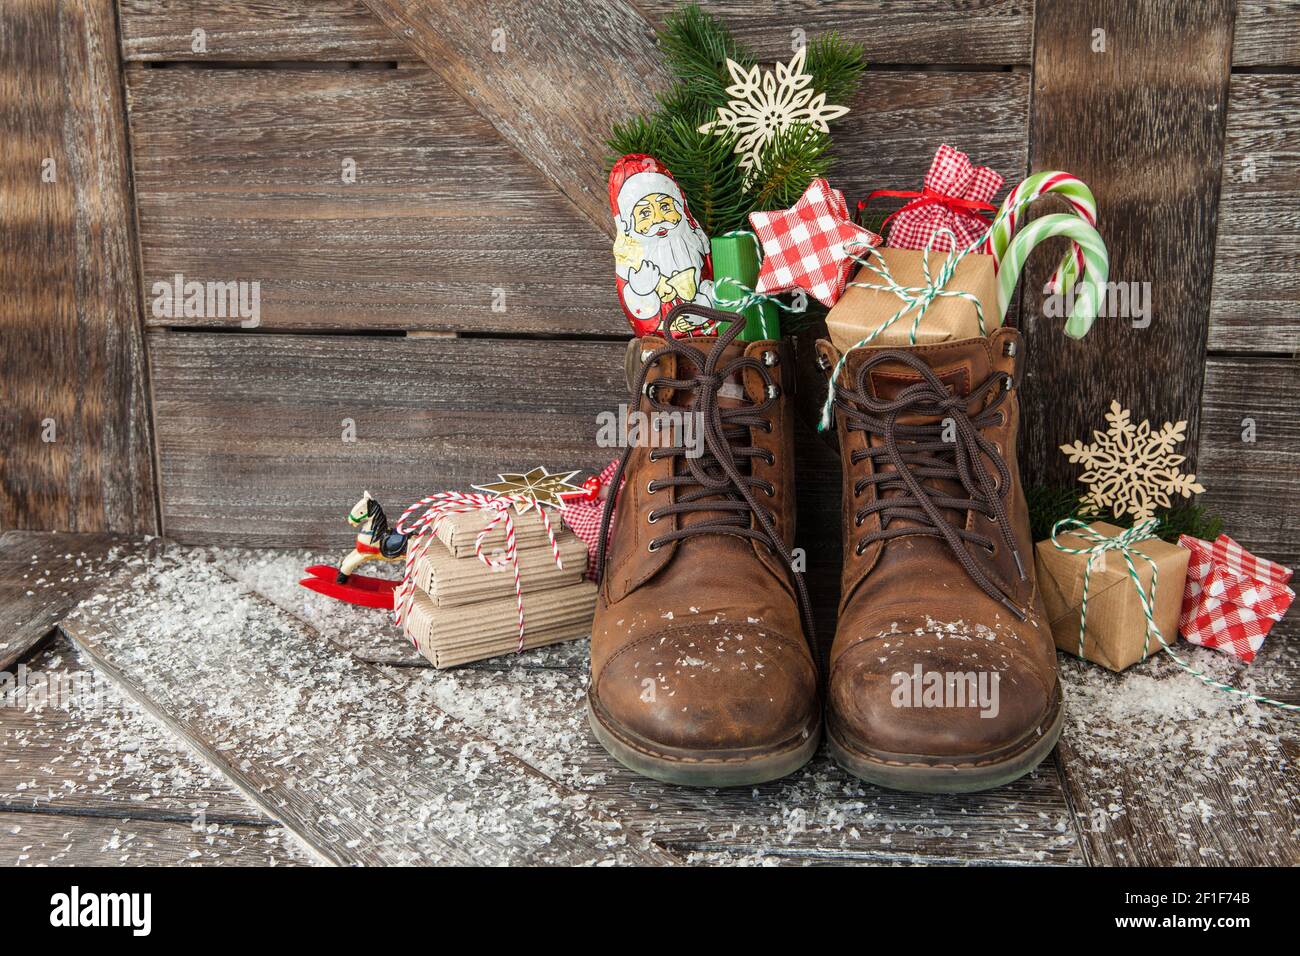 https://c8.alamy.com/comp/2F1F74B/boots-with-gifts-and-sweets-2F1F74B.jpg